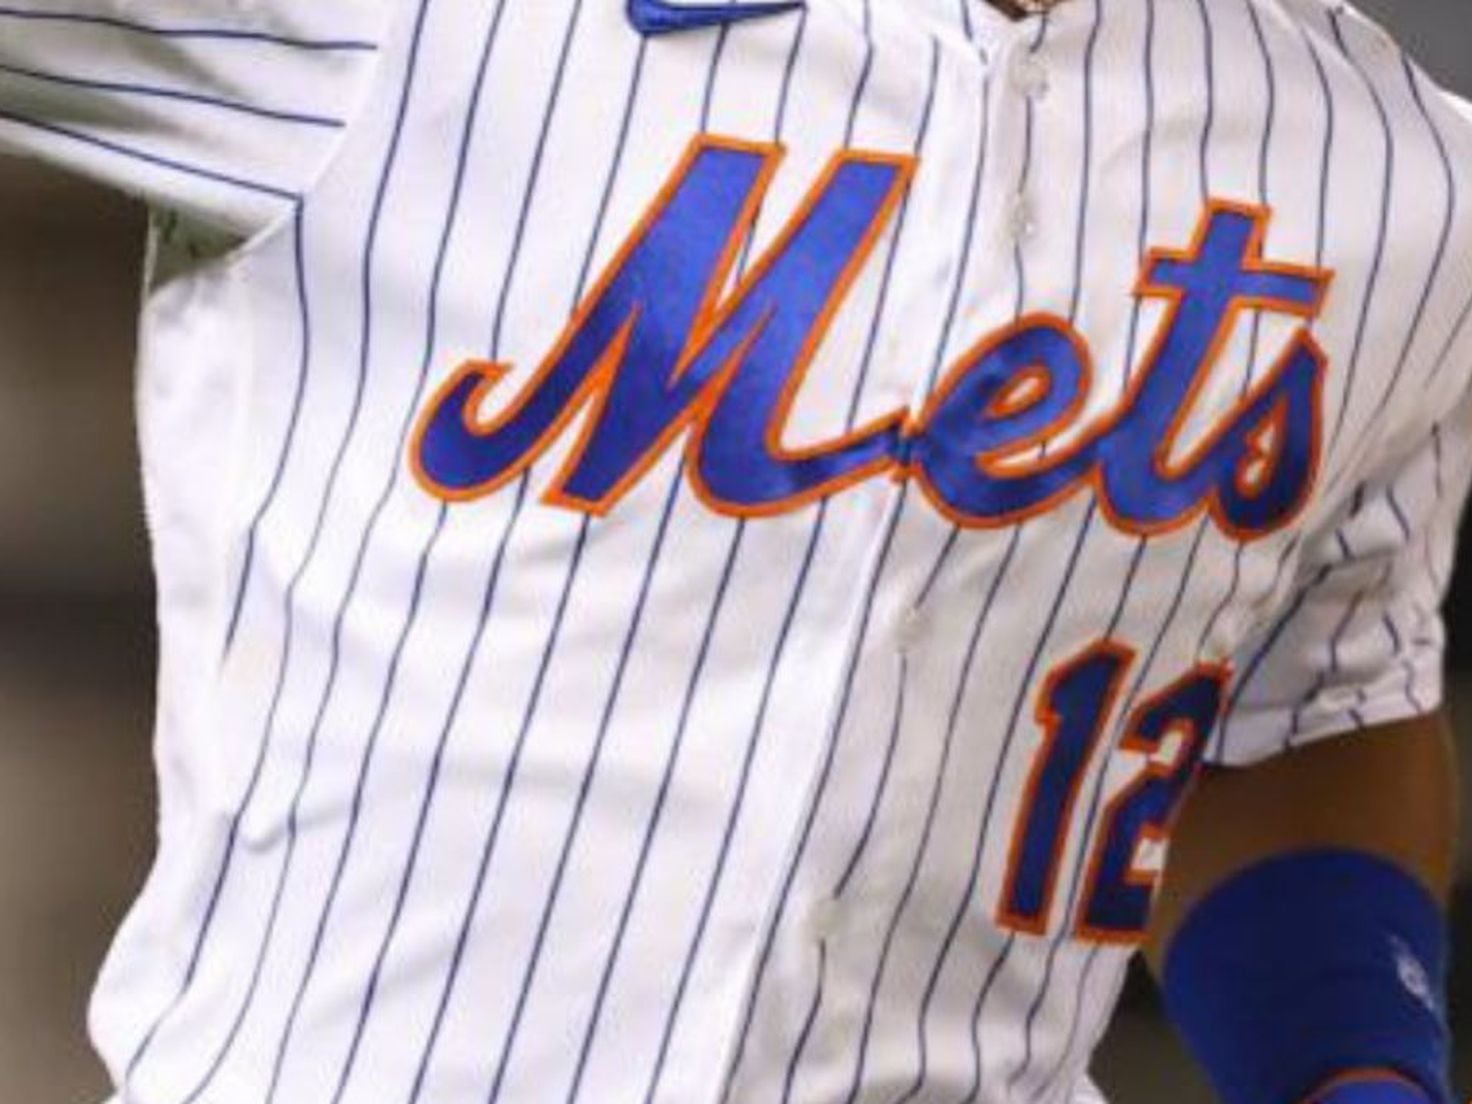 Just in time for the new year, I've completed my 2021 Mets jersey